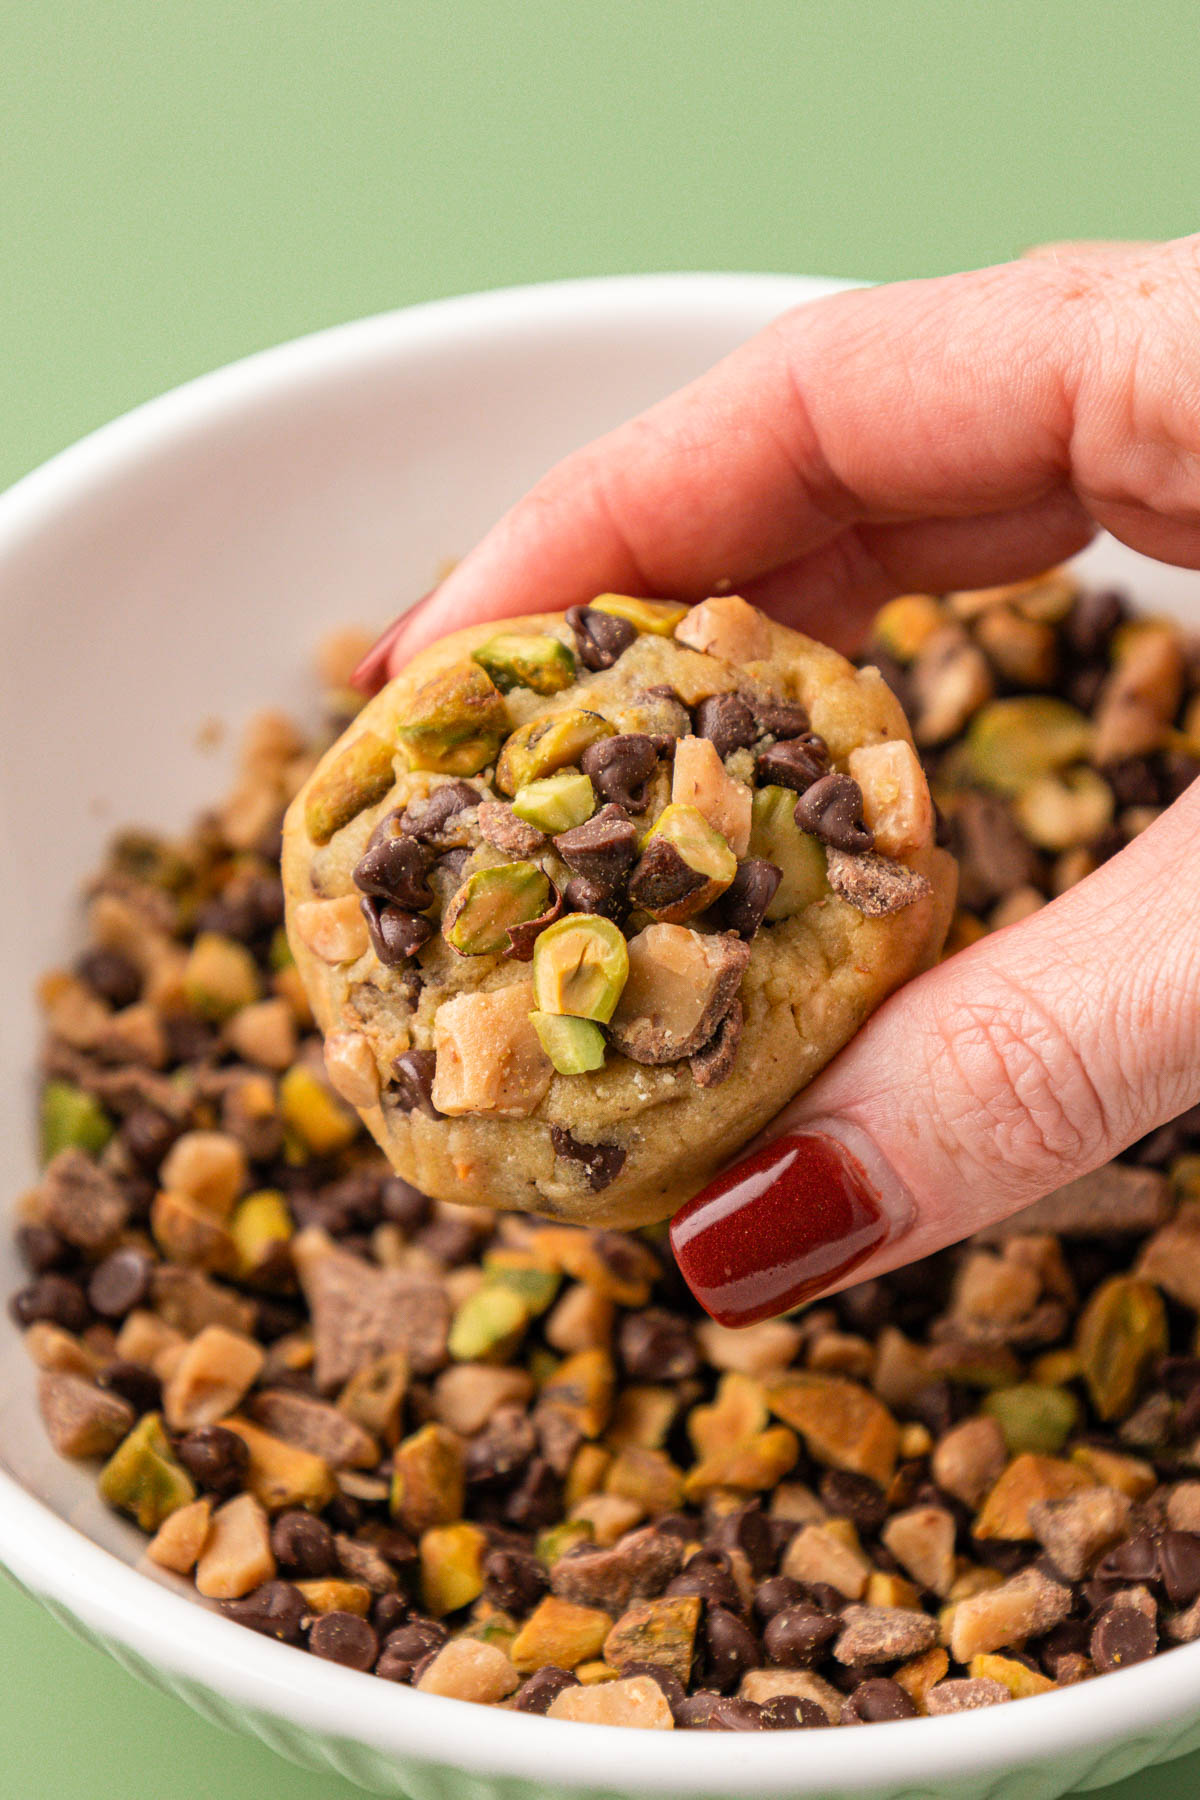 Pistachio Toffee Chocolate Chip Cookies being coated in more.